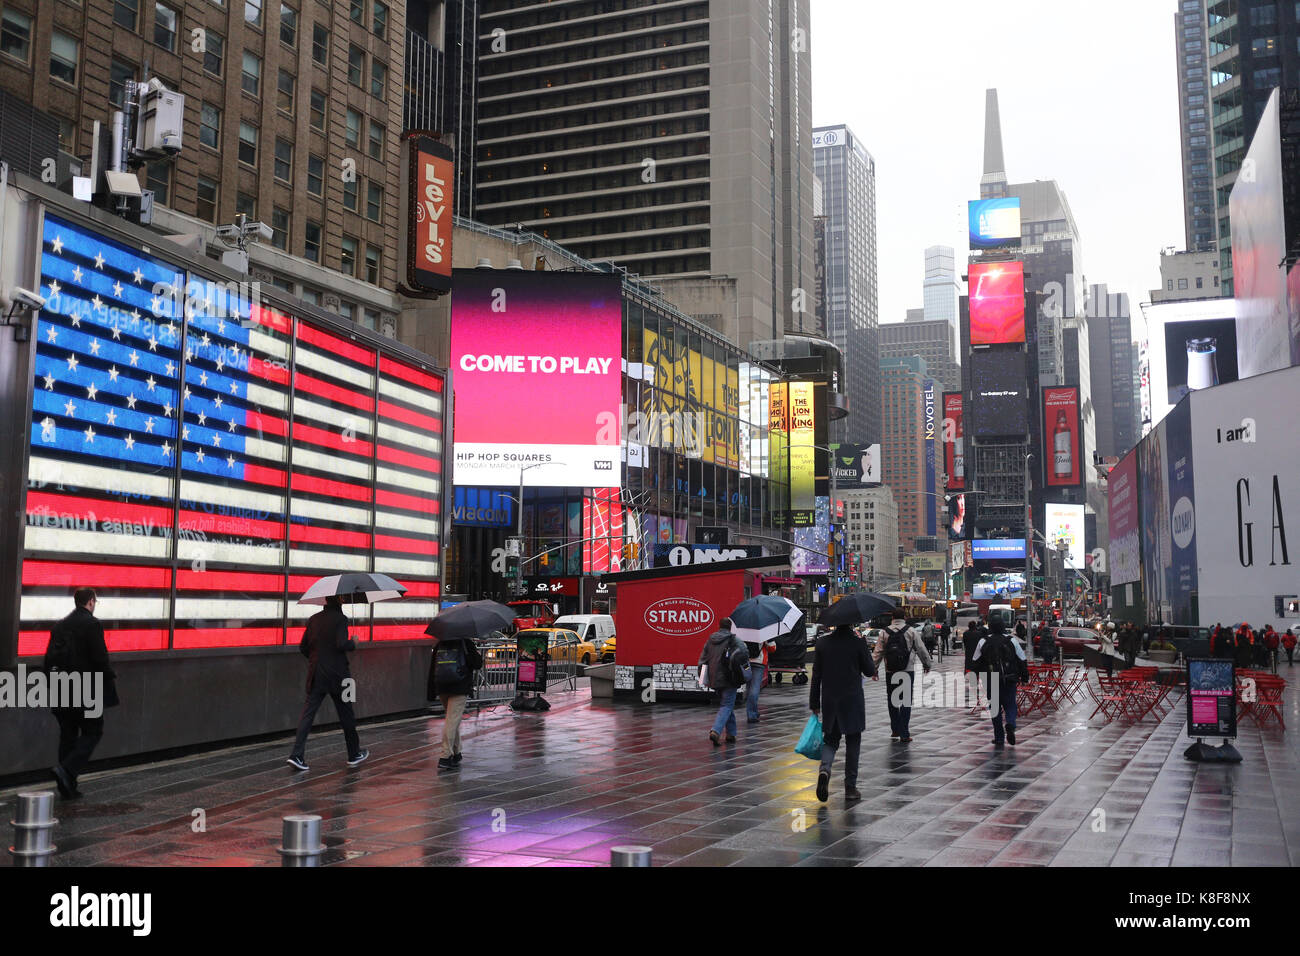 NEW YORK, USA - MARCH 2017 - View of Times Square on a rainy day, the american flag is shown at the side on an electronic panel Stock Photo